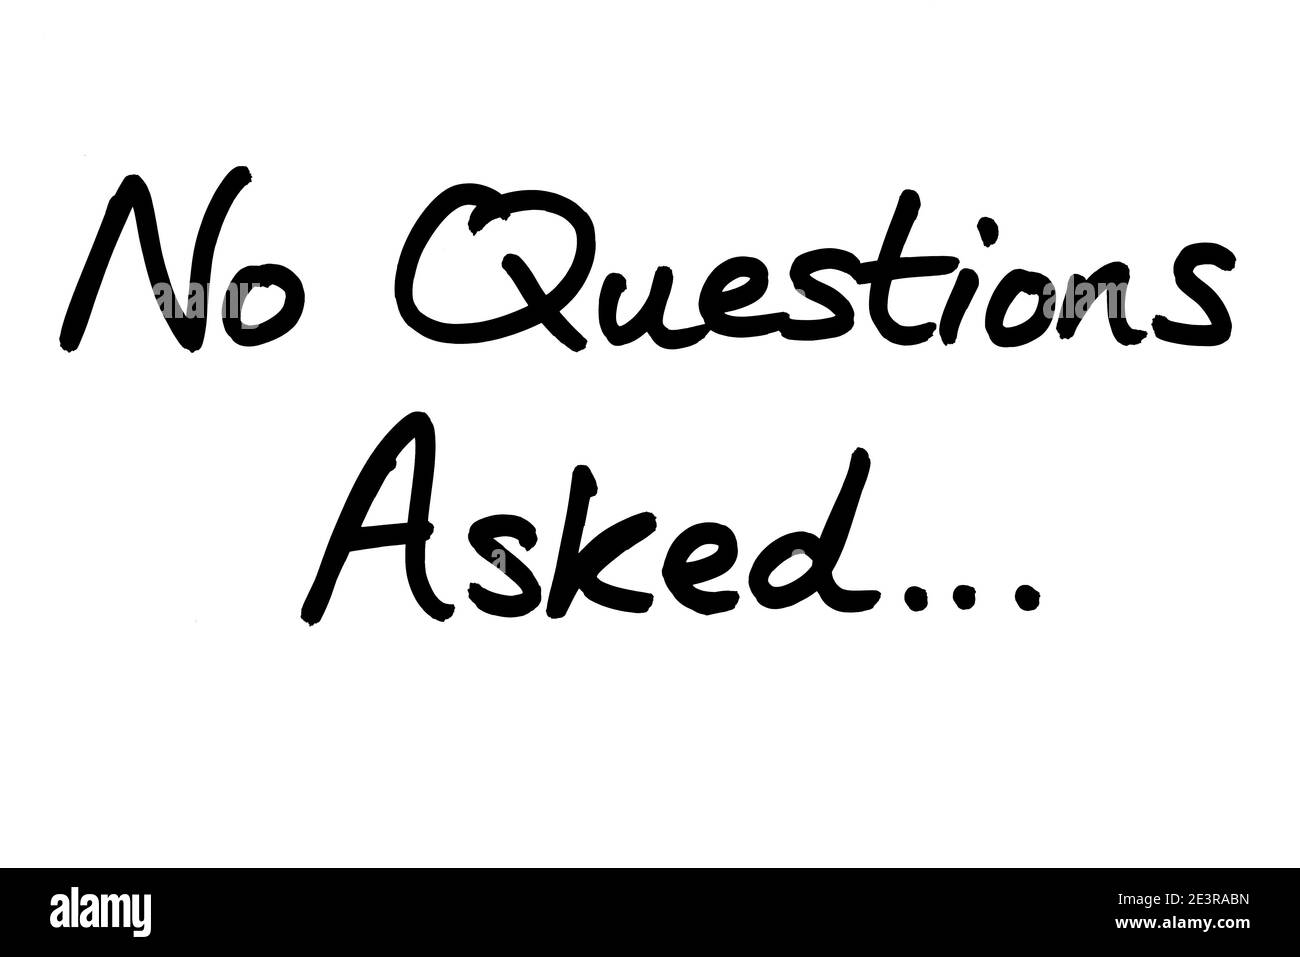 No Questions Asked… handwritten on a white background. Stock Photo